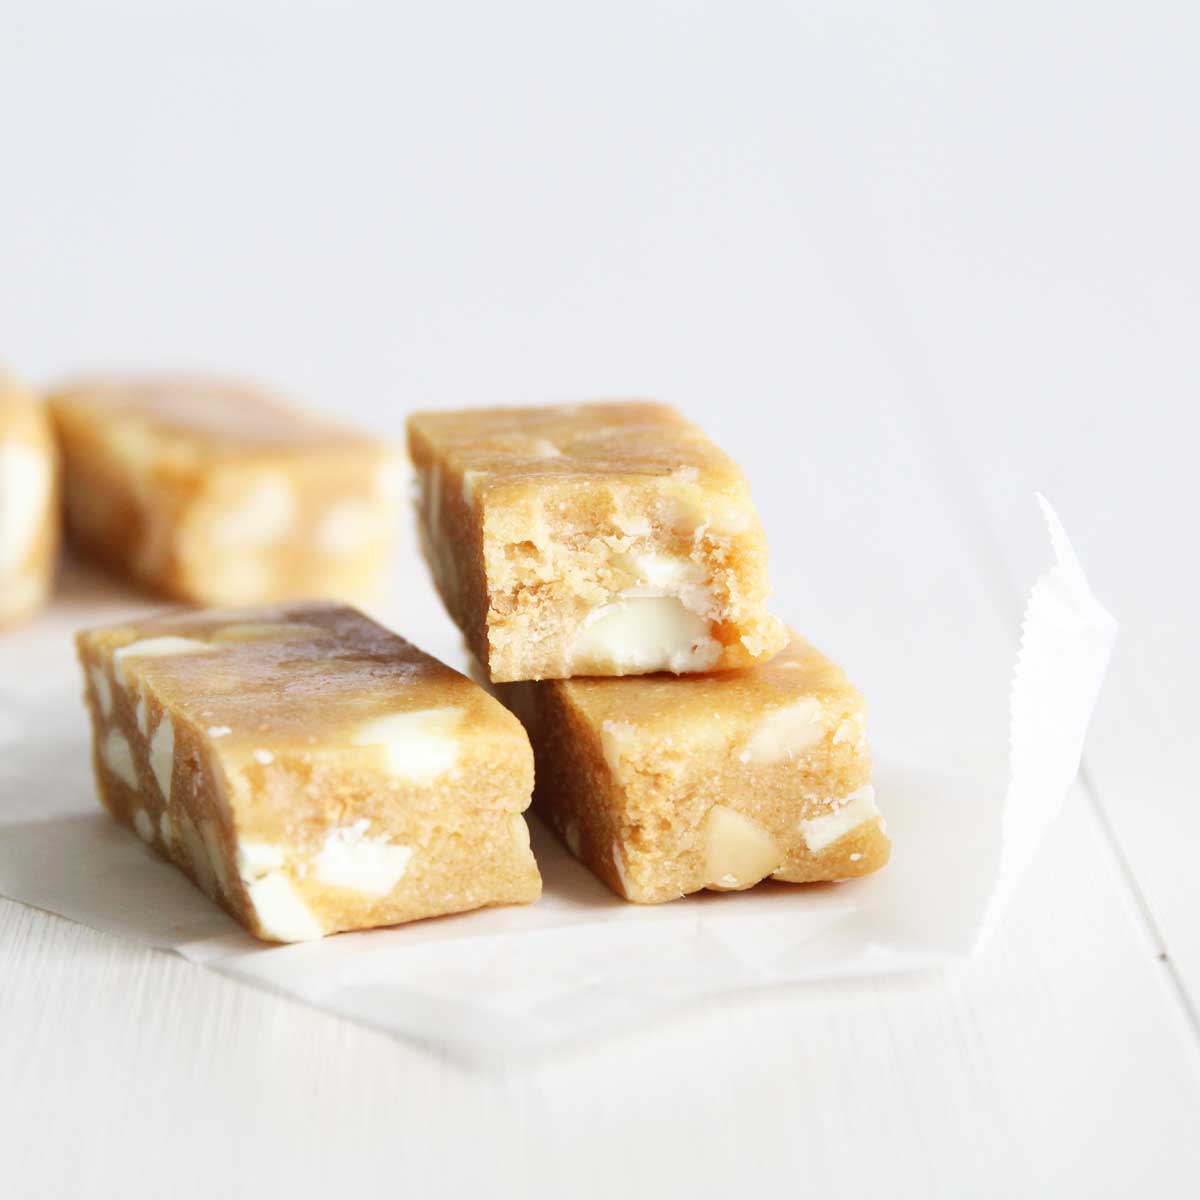 Chunky White Chocolate Macadamia Protein Bars Recipe (made with Collagen Peptides) - PB Fit Protein Bars